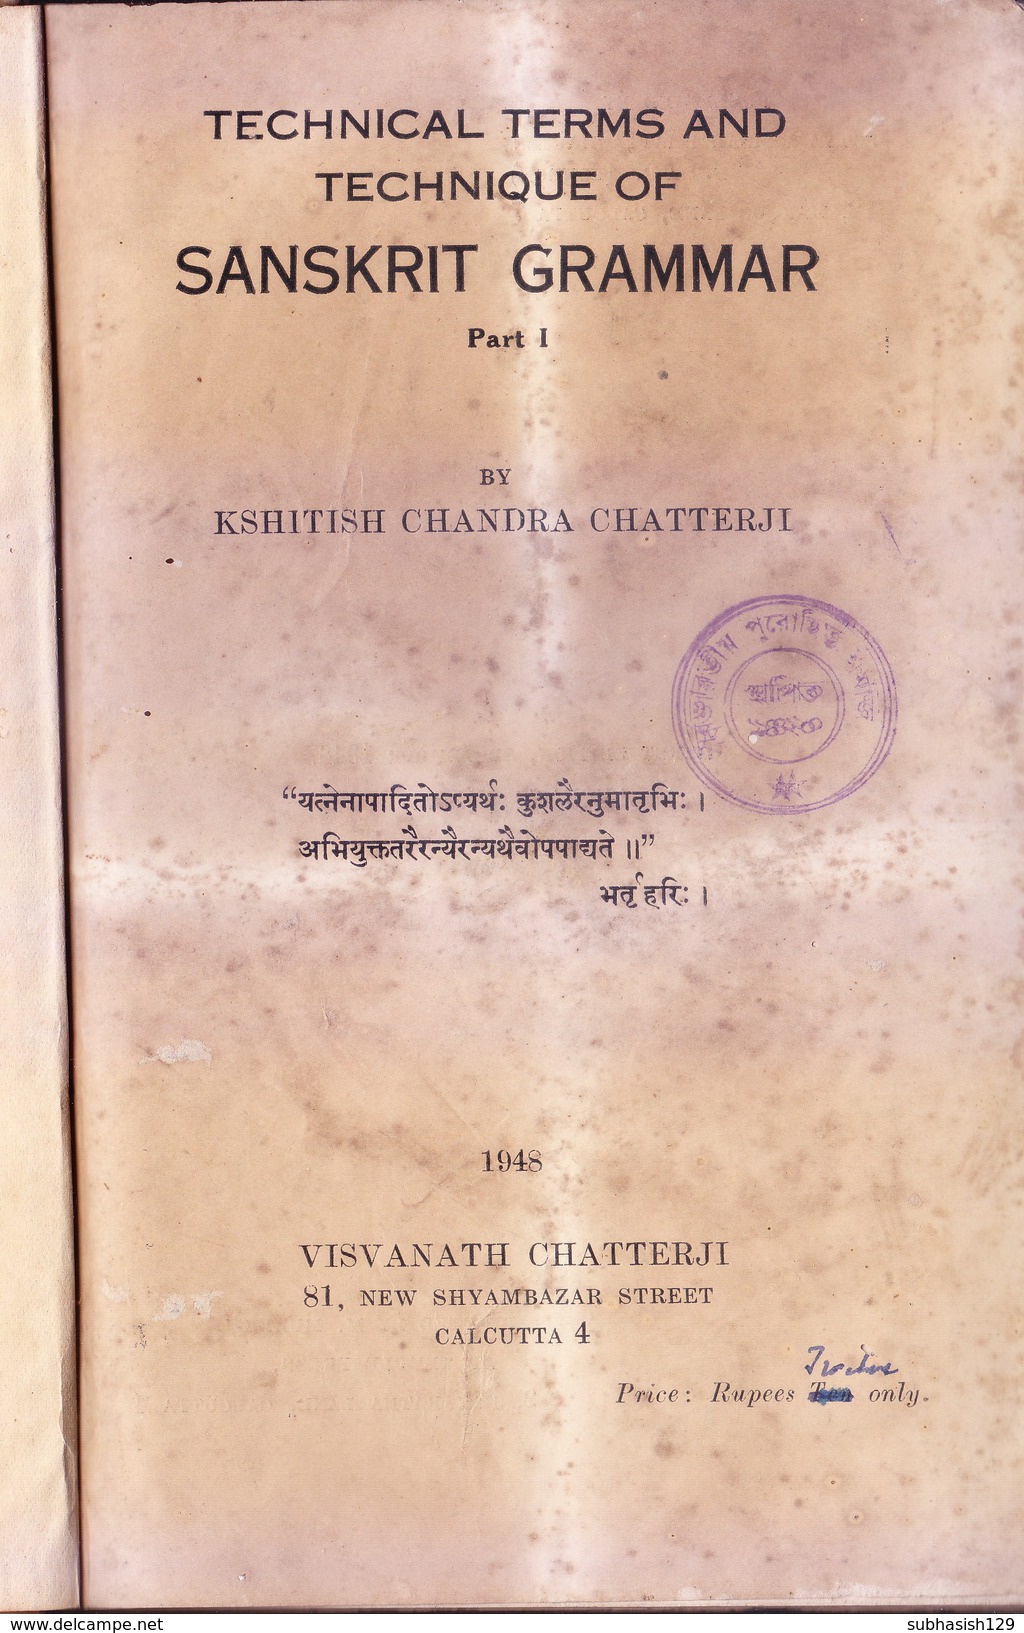 INDIA - OLD, RARE AND ANTIQUE BOOK - TECHNICAL TERMS AND TECHNIQUE OF SANSKRIT GRAMMER - PART I - English Language/ Grammar